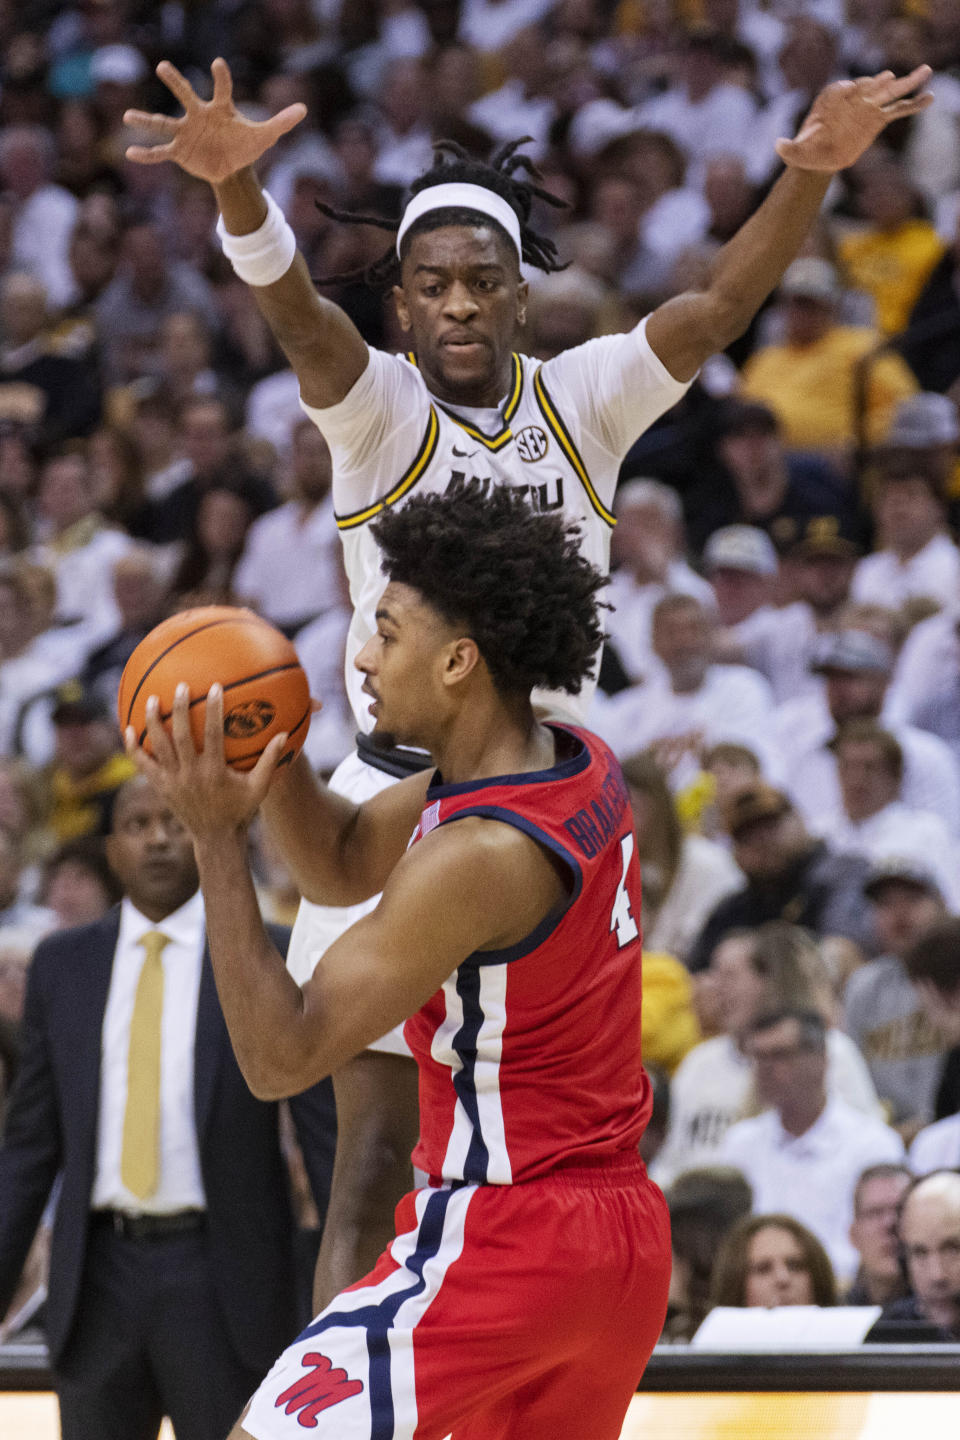 Missouri's Sean East II, top, defends Mississippi's Jaemyn Brakefield during the second half of an NCAA college basketball game Saturday, March 4, 2023, in Columbia, Mo. Missouri won 82-77. (AP Photo/L.G. Patterson)